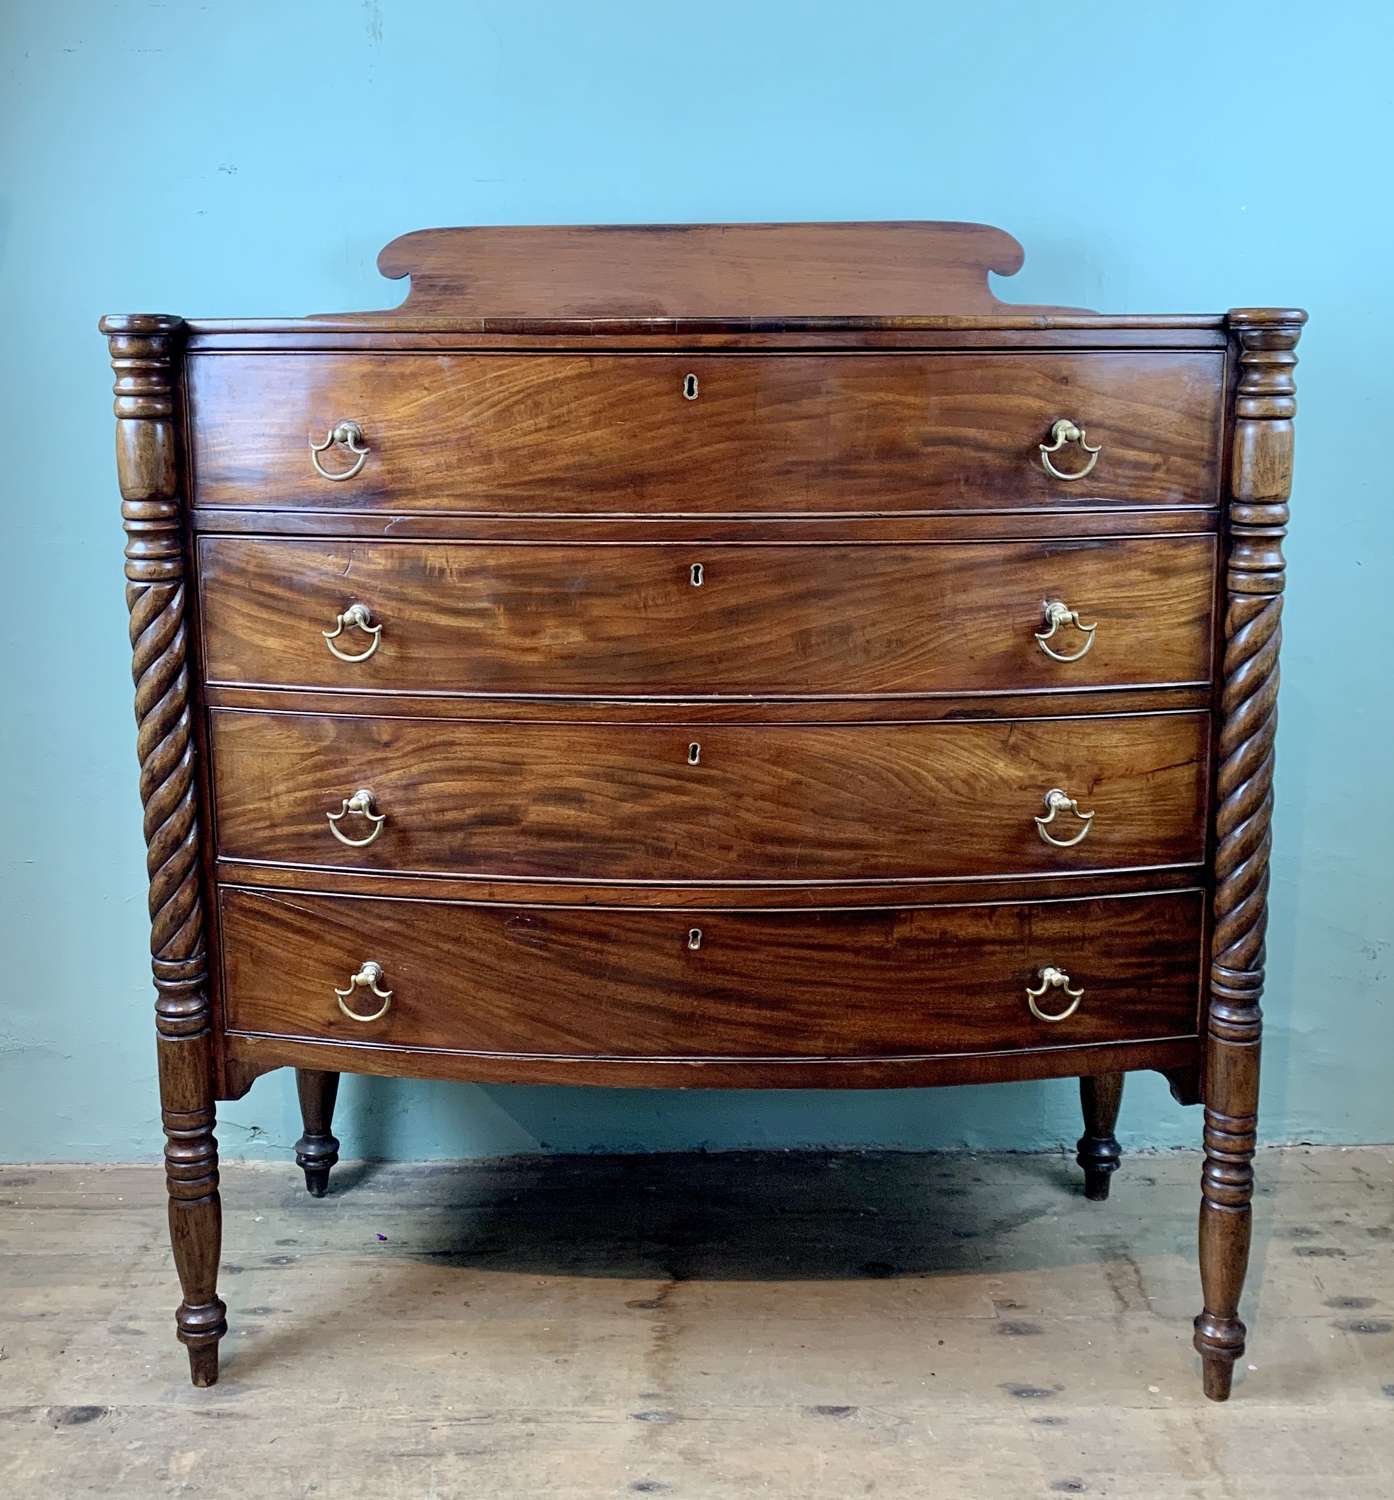 Regency Mahogany Chest of Drawers With Column Corners